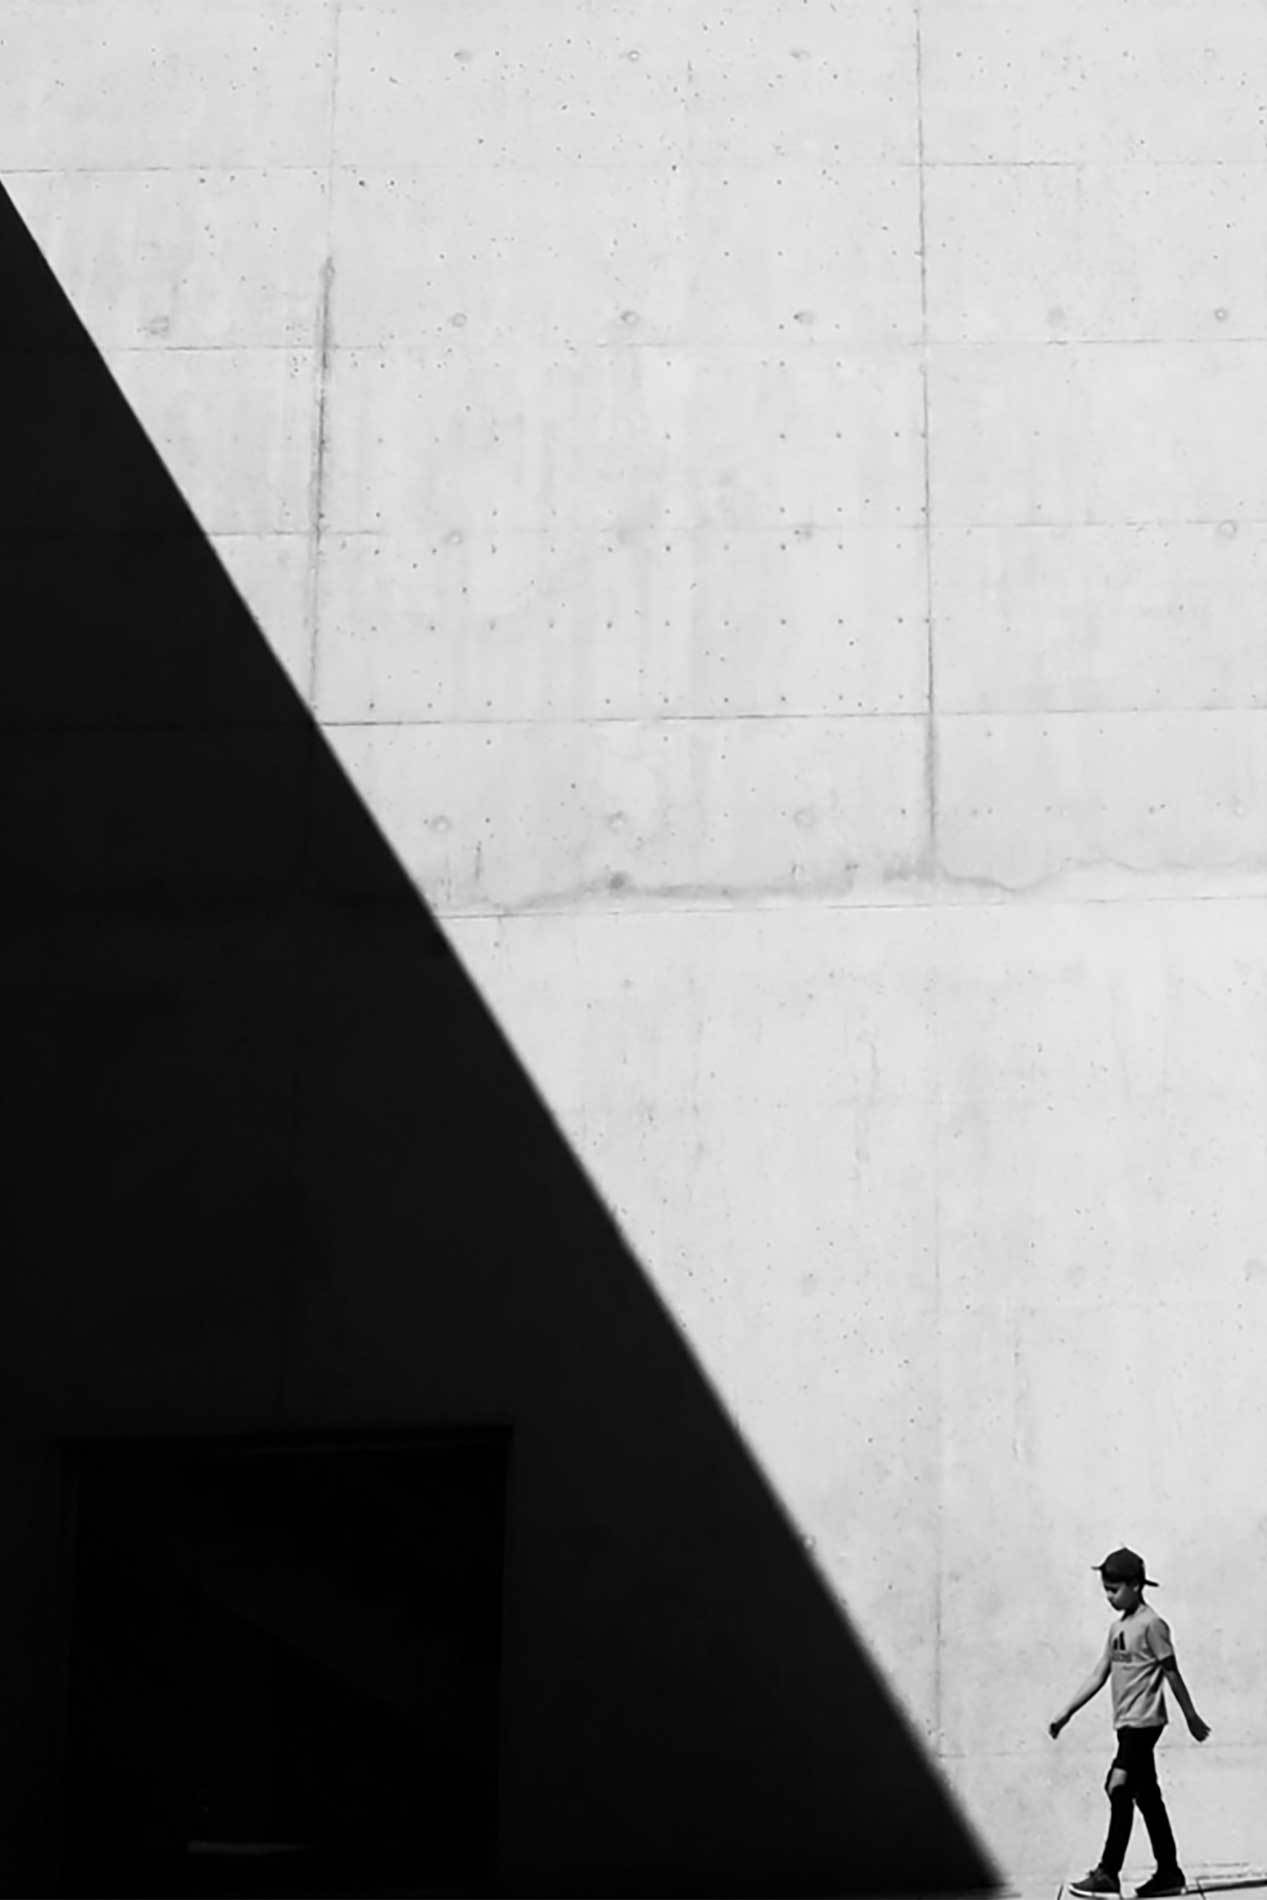 MINIMALIST PHOTOGRAPHY: LESS IS MORE